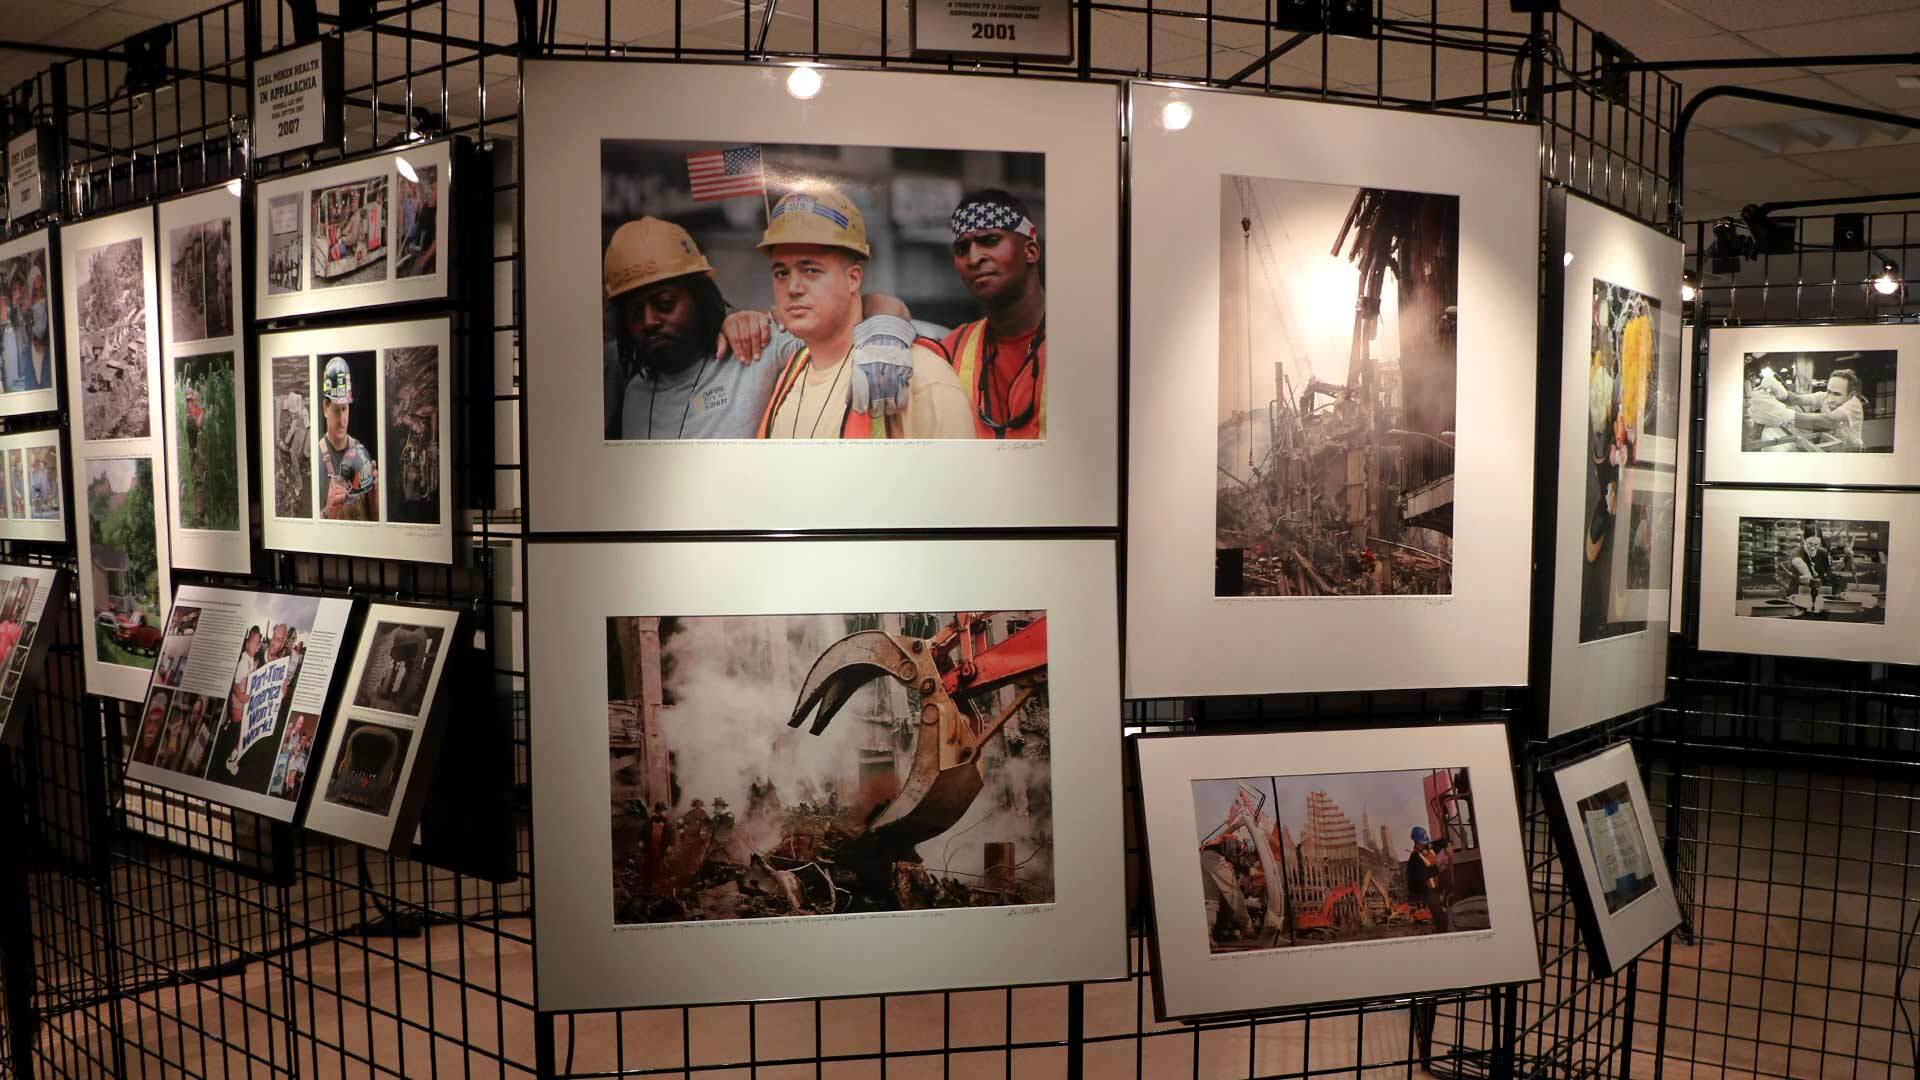 Earl Dotter's photography exhibit. Centers four framed photos of labor in the wake of 9/11.